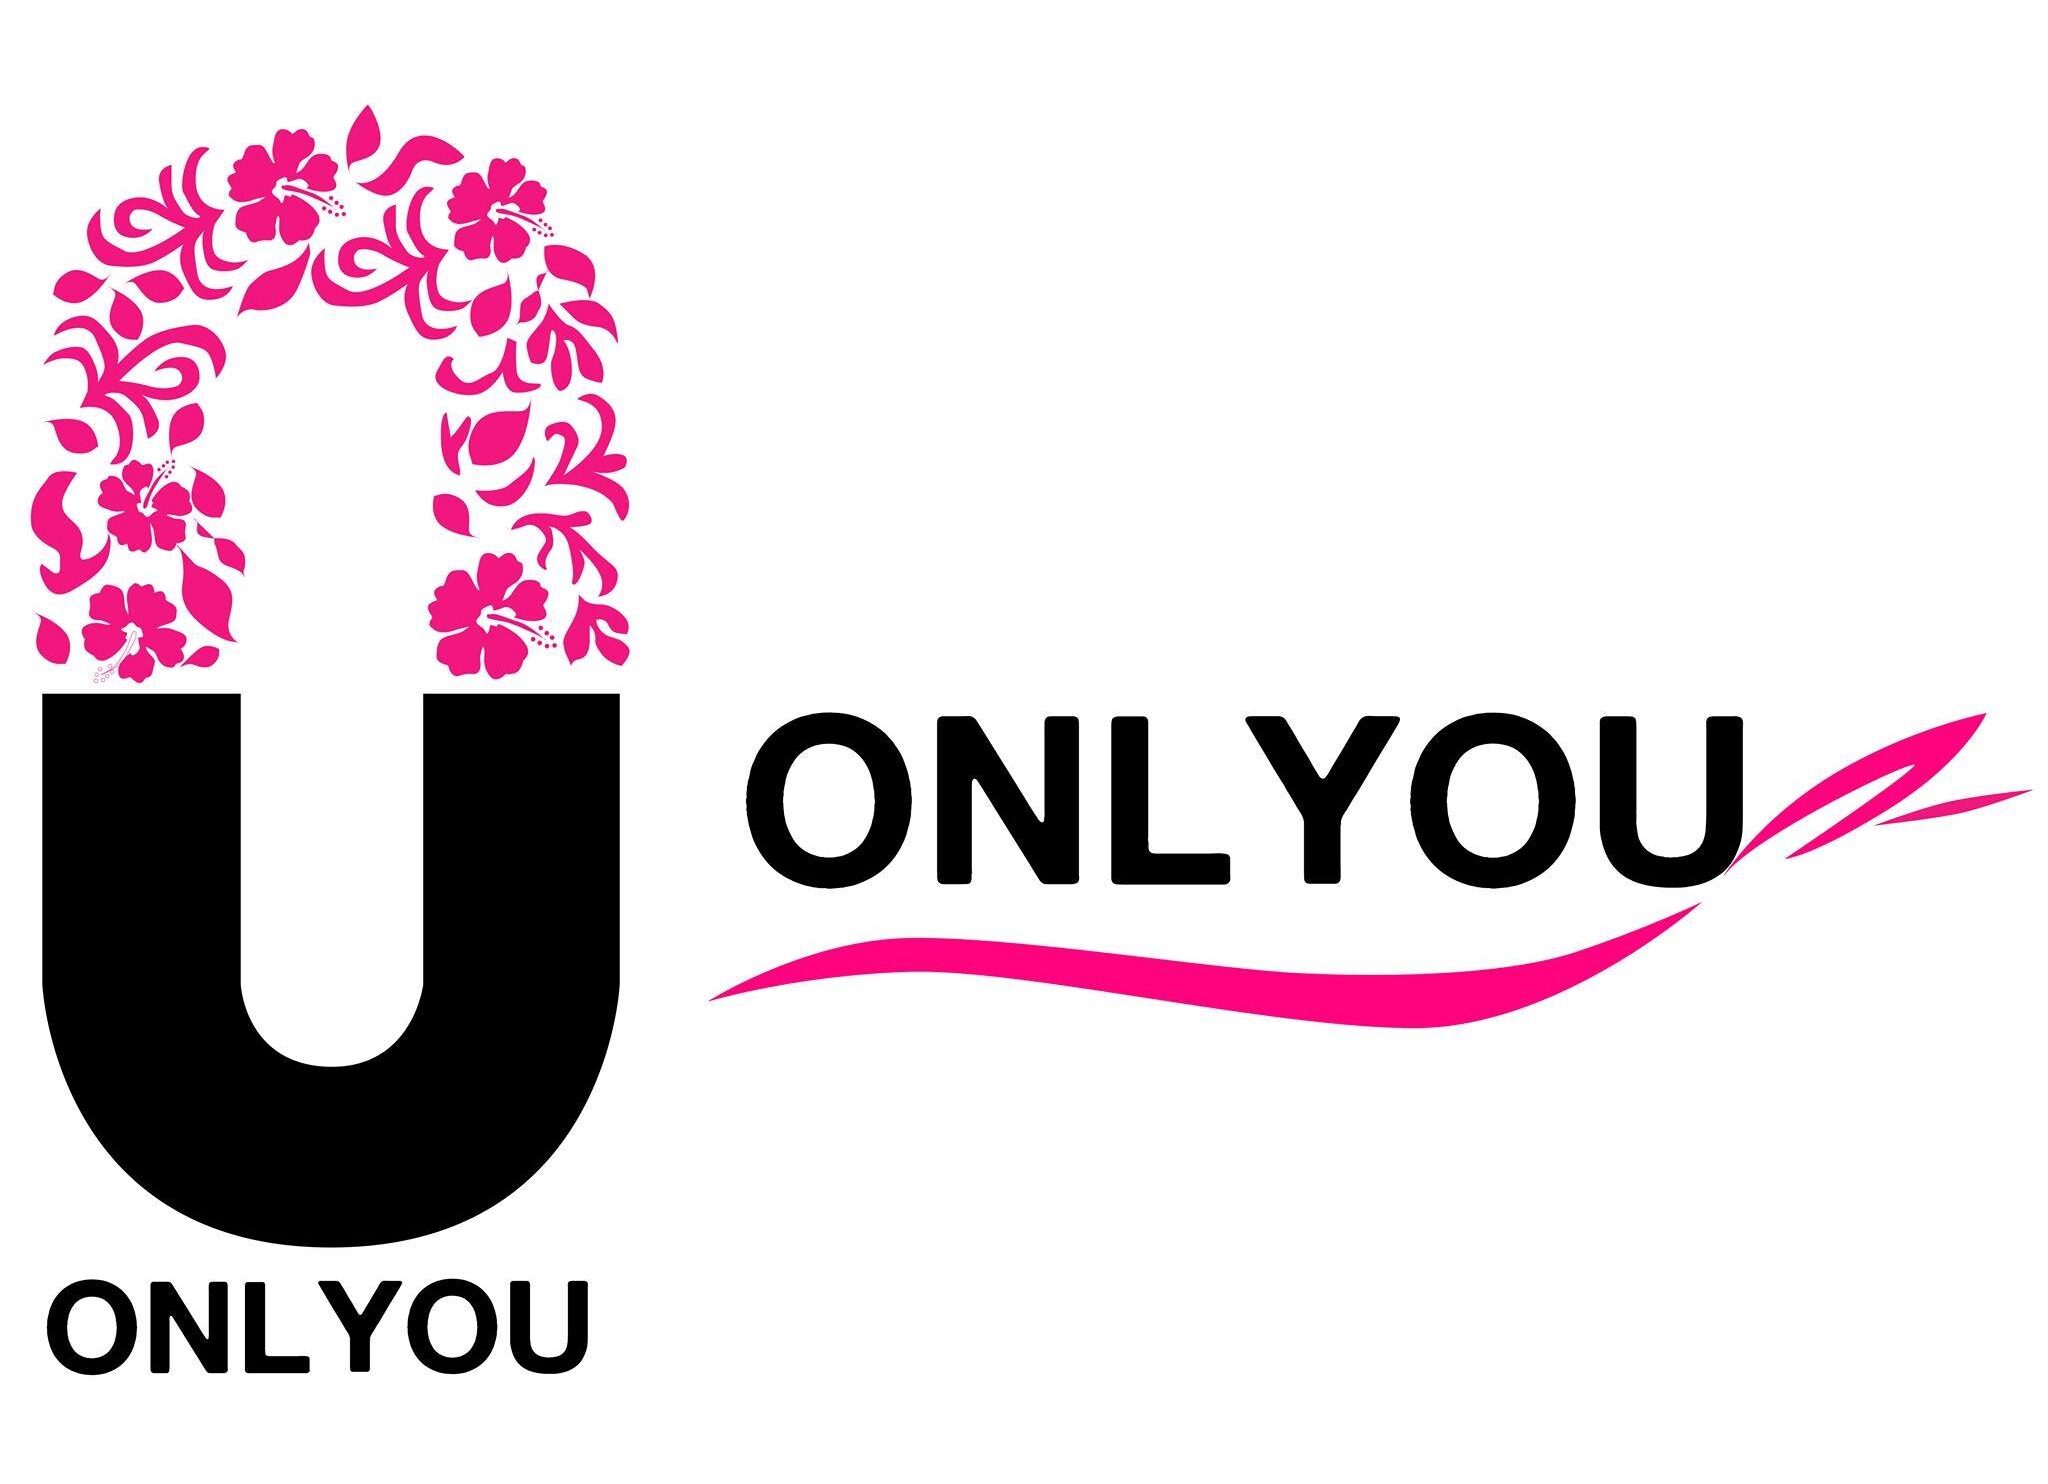 ONLYOU Perfume - Only You - Fragrances 